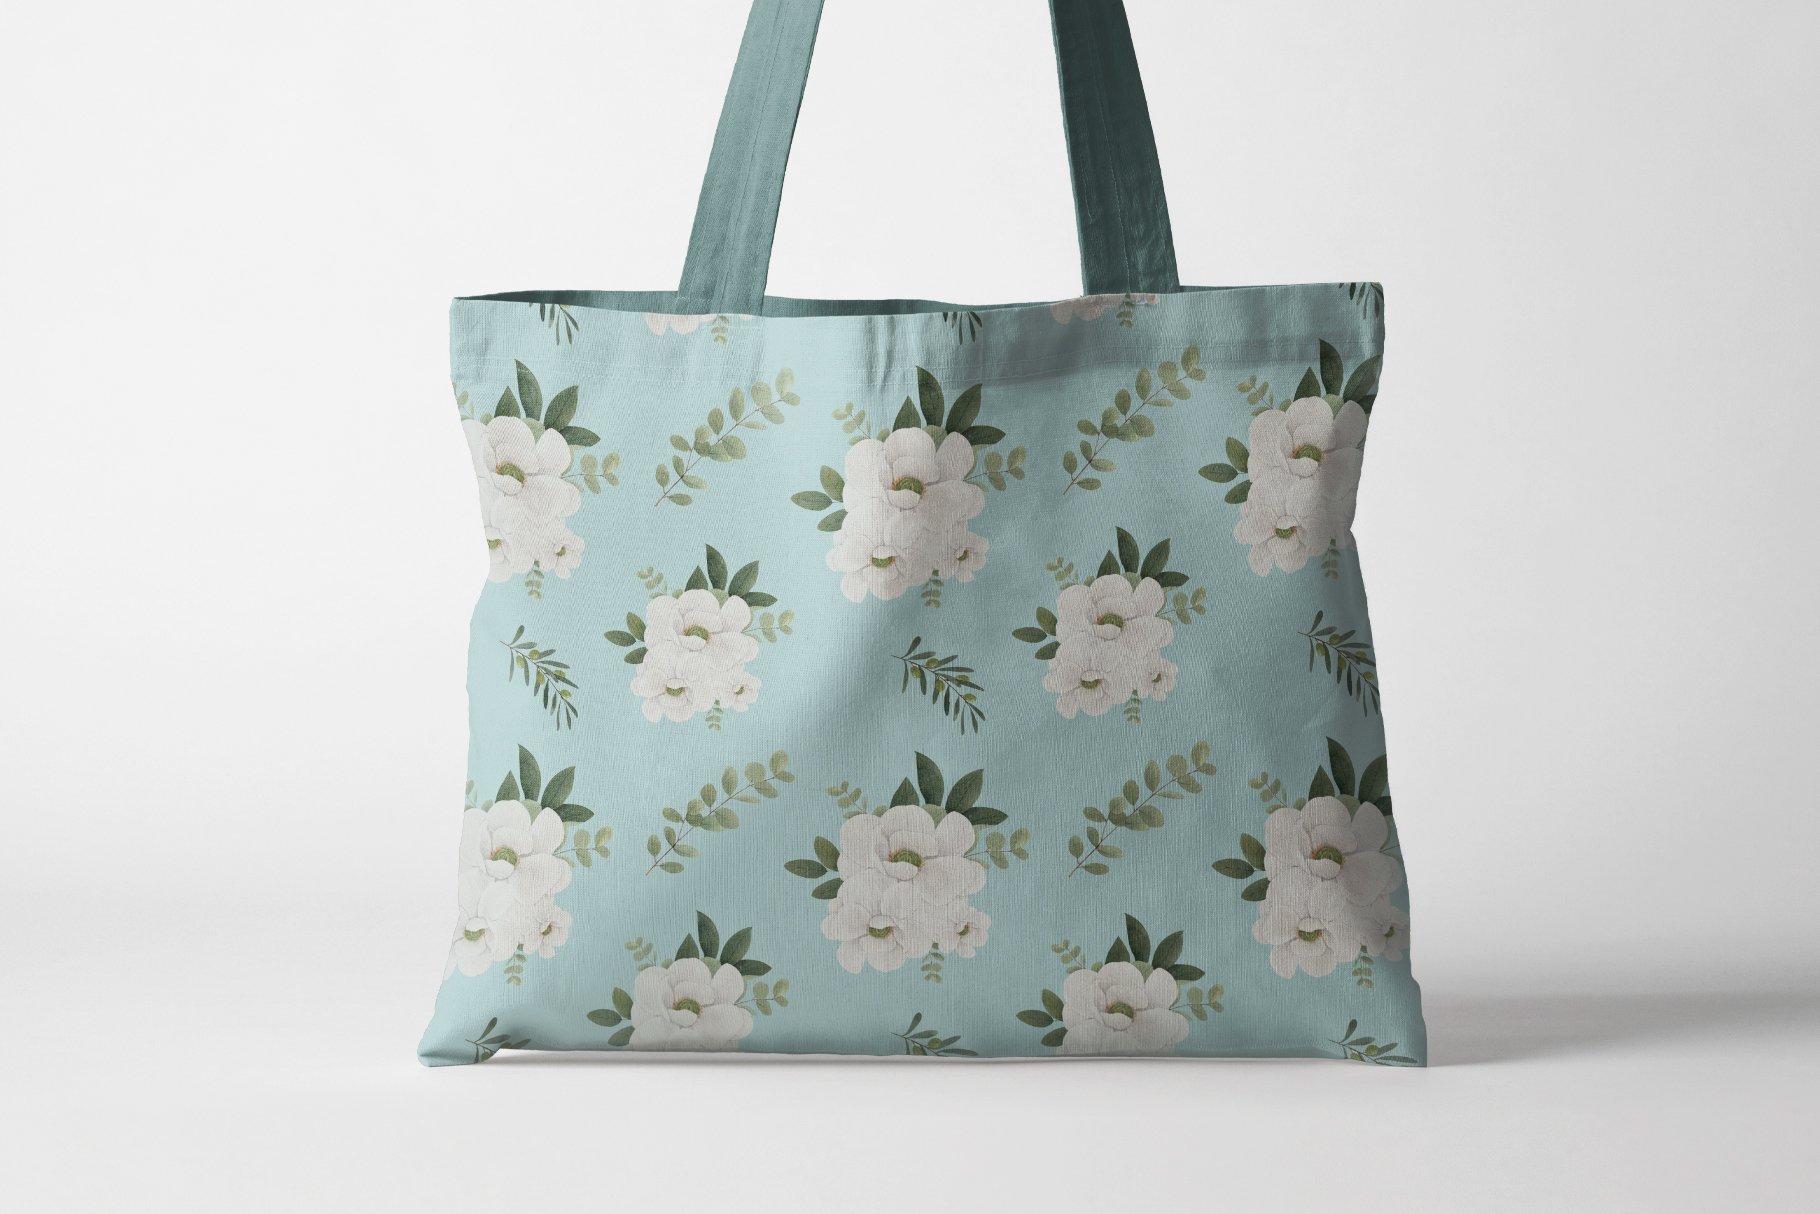 Green bag with the winter florals mood illustration.